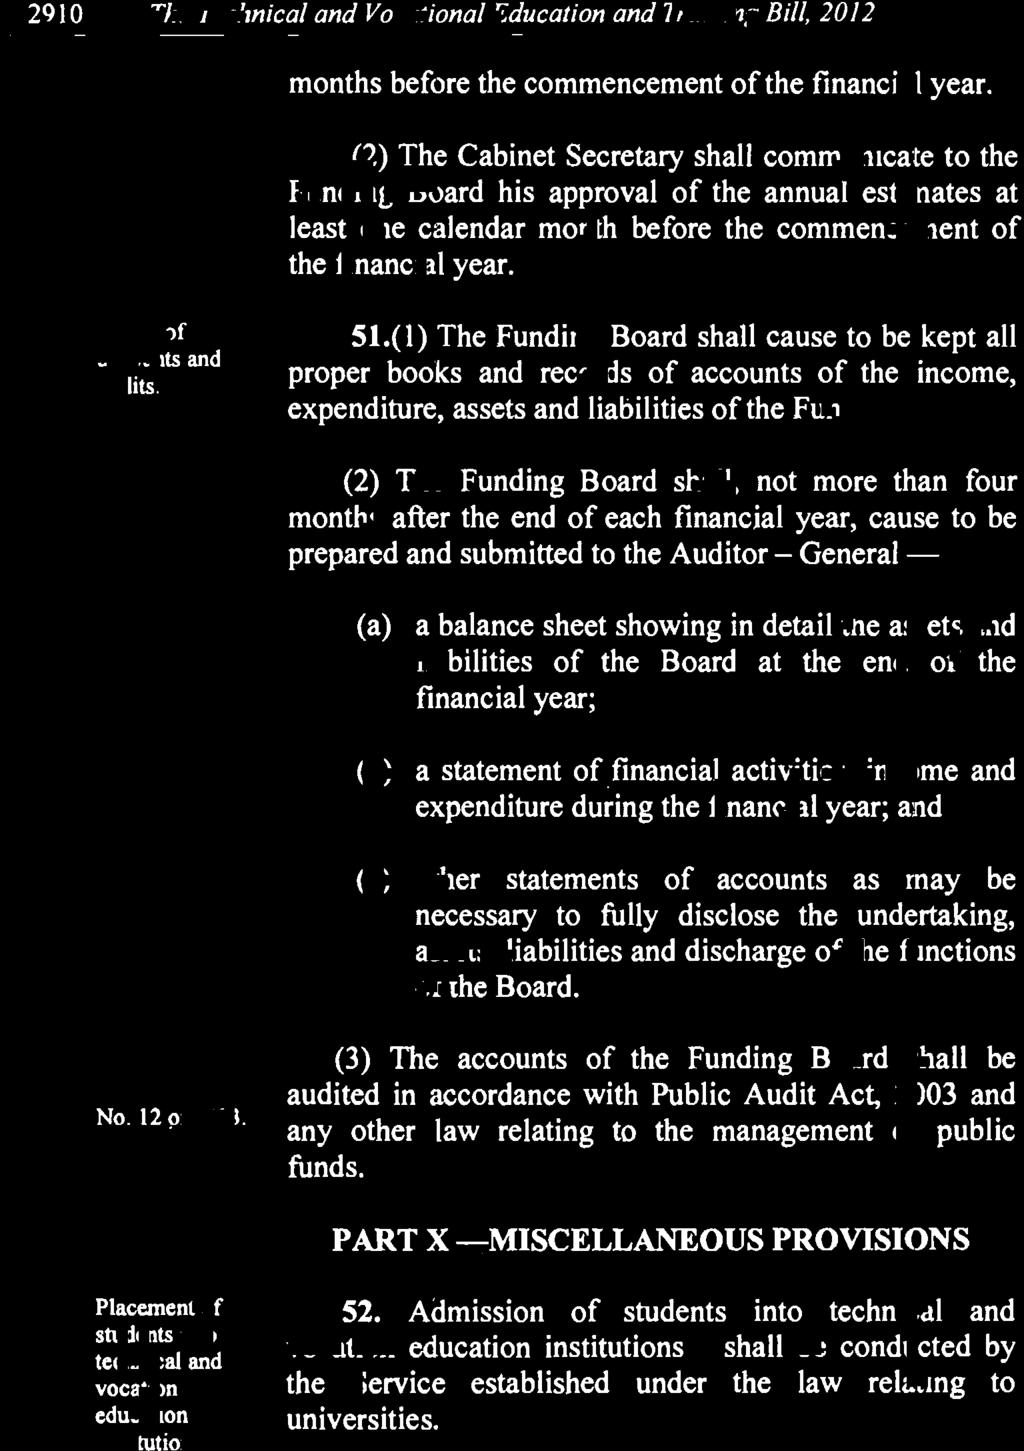 (3) The accounts of the Funding Board shall be audited in accordance with Public Audit Act, 2003 and any other law